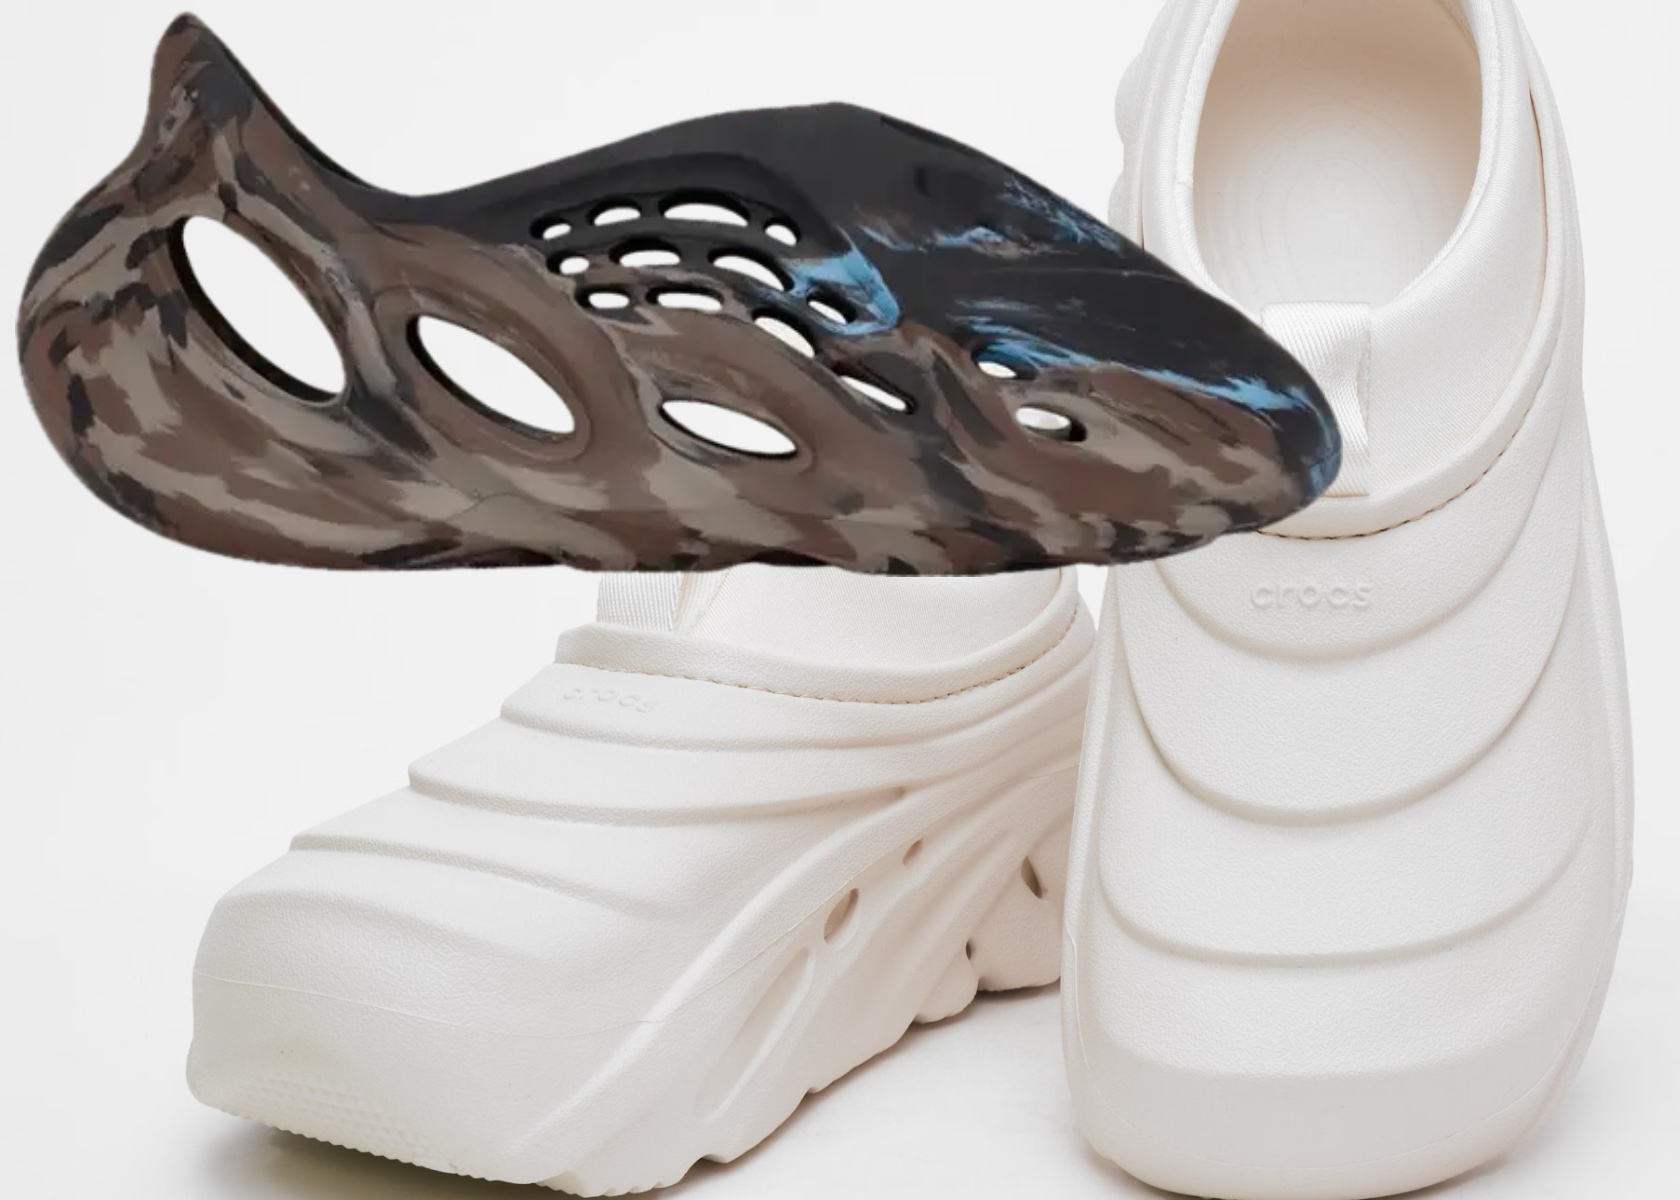 #Design Nightmares: Why the Yeezy Foam Runners and Crocs Echo Storm Will Ruin Father’s Day